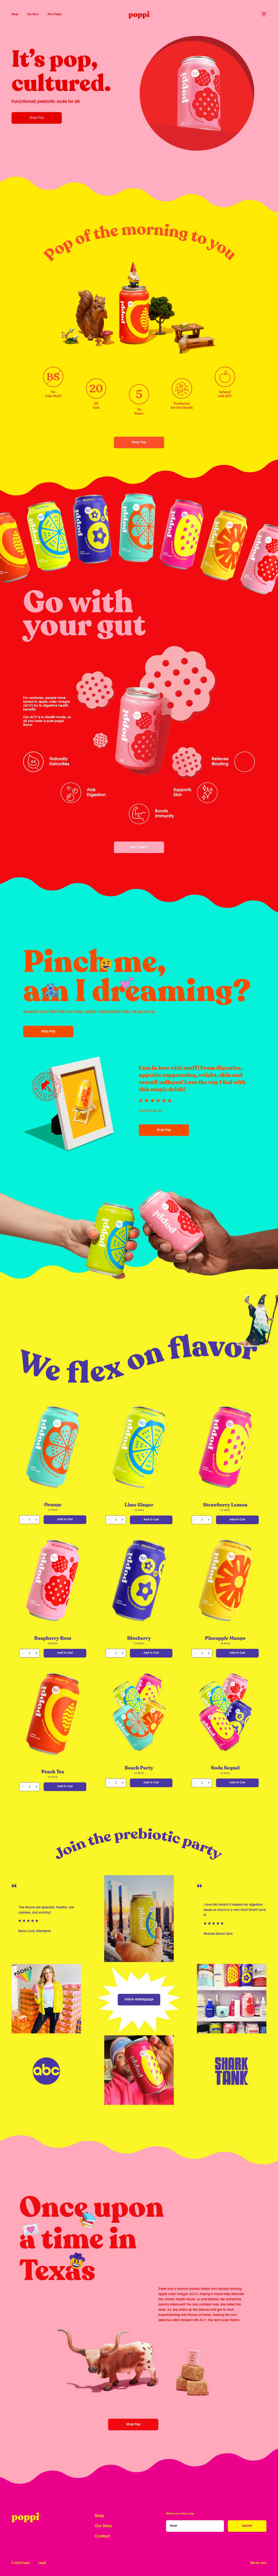 Poppi Landing Page Example: Fun(ctional) prebiotic soda for all. Our ACV is in stealth mode, so all you taste is pure poppi flavor.